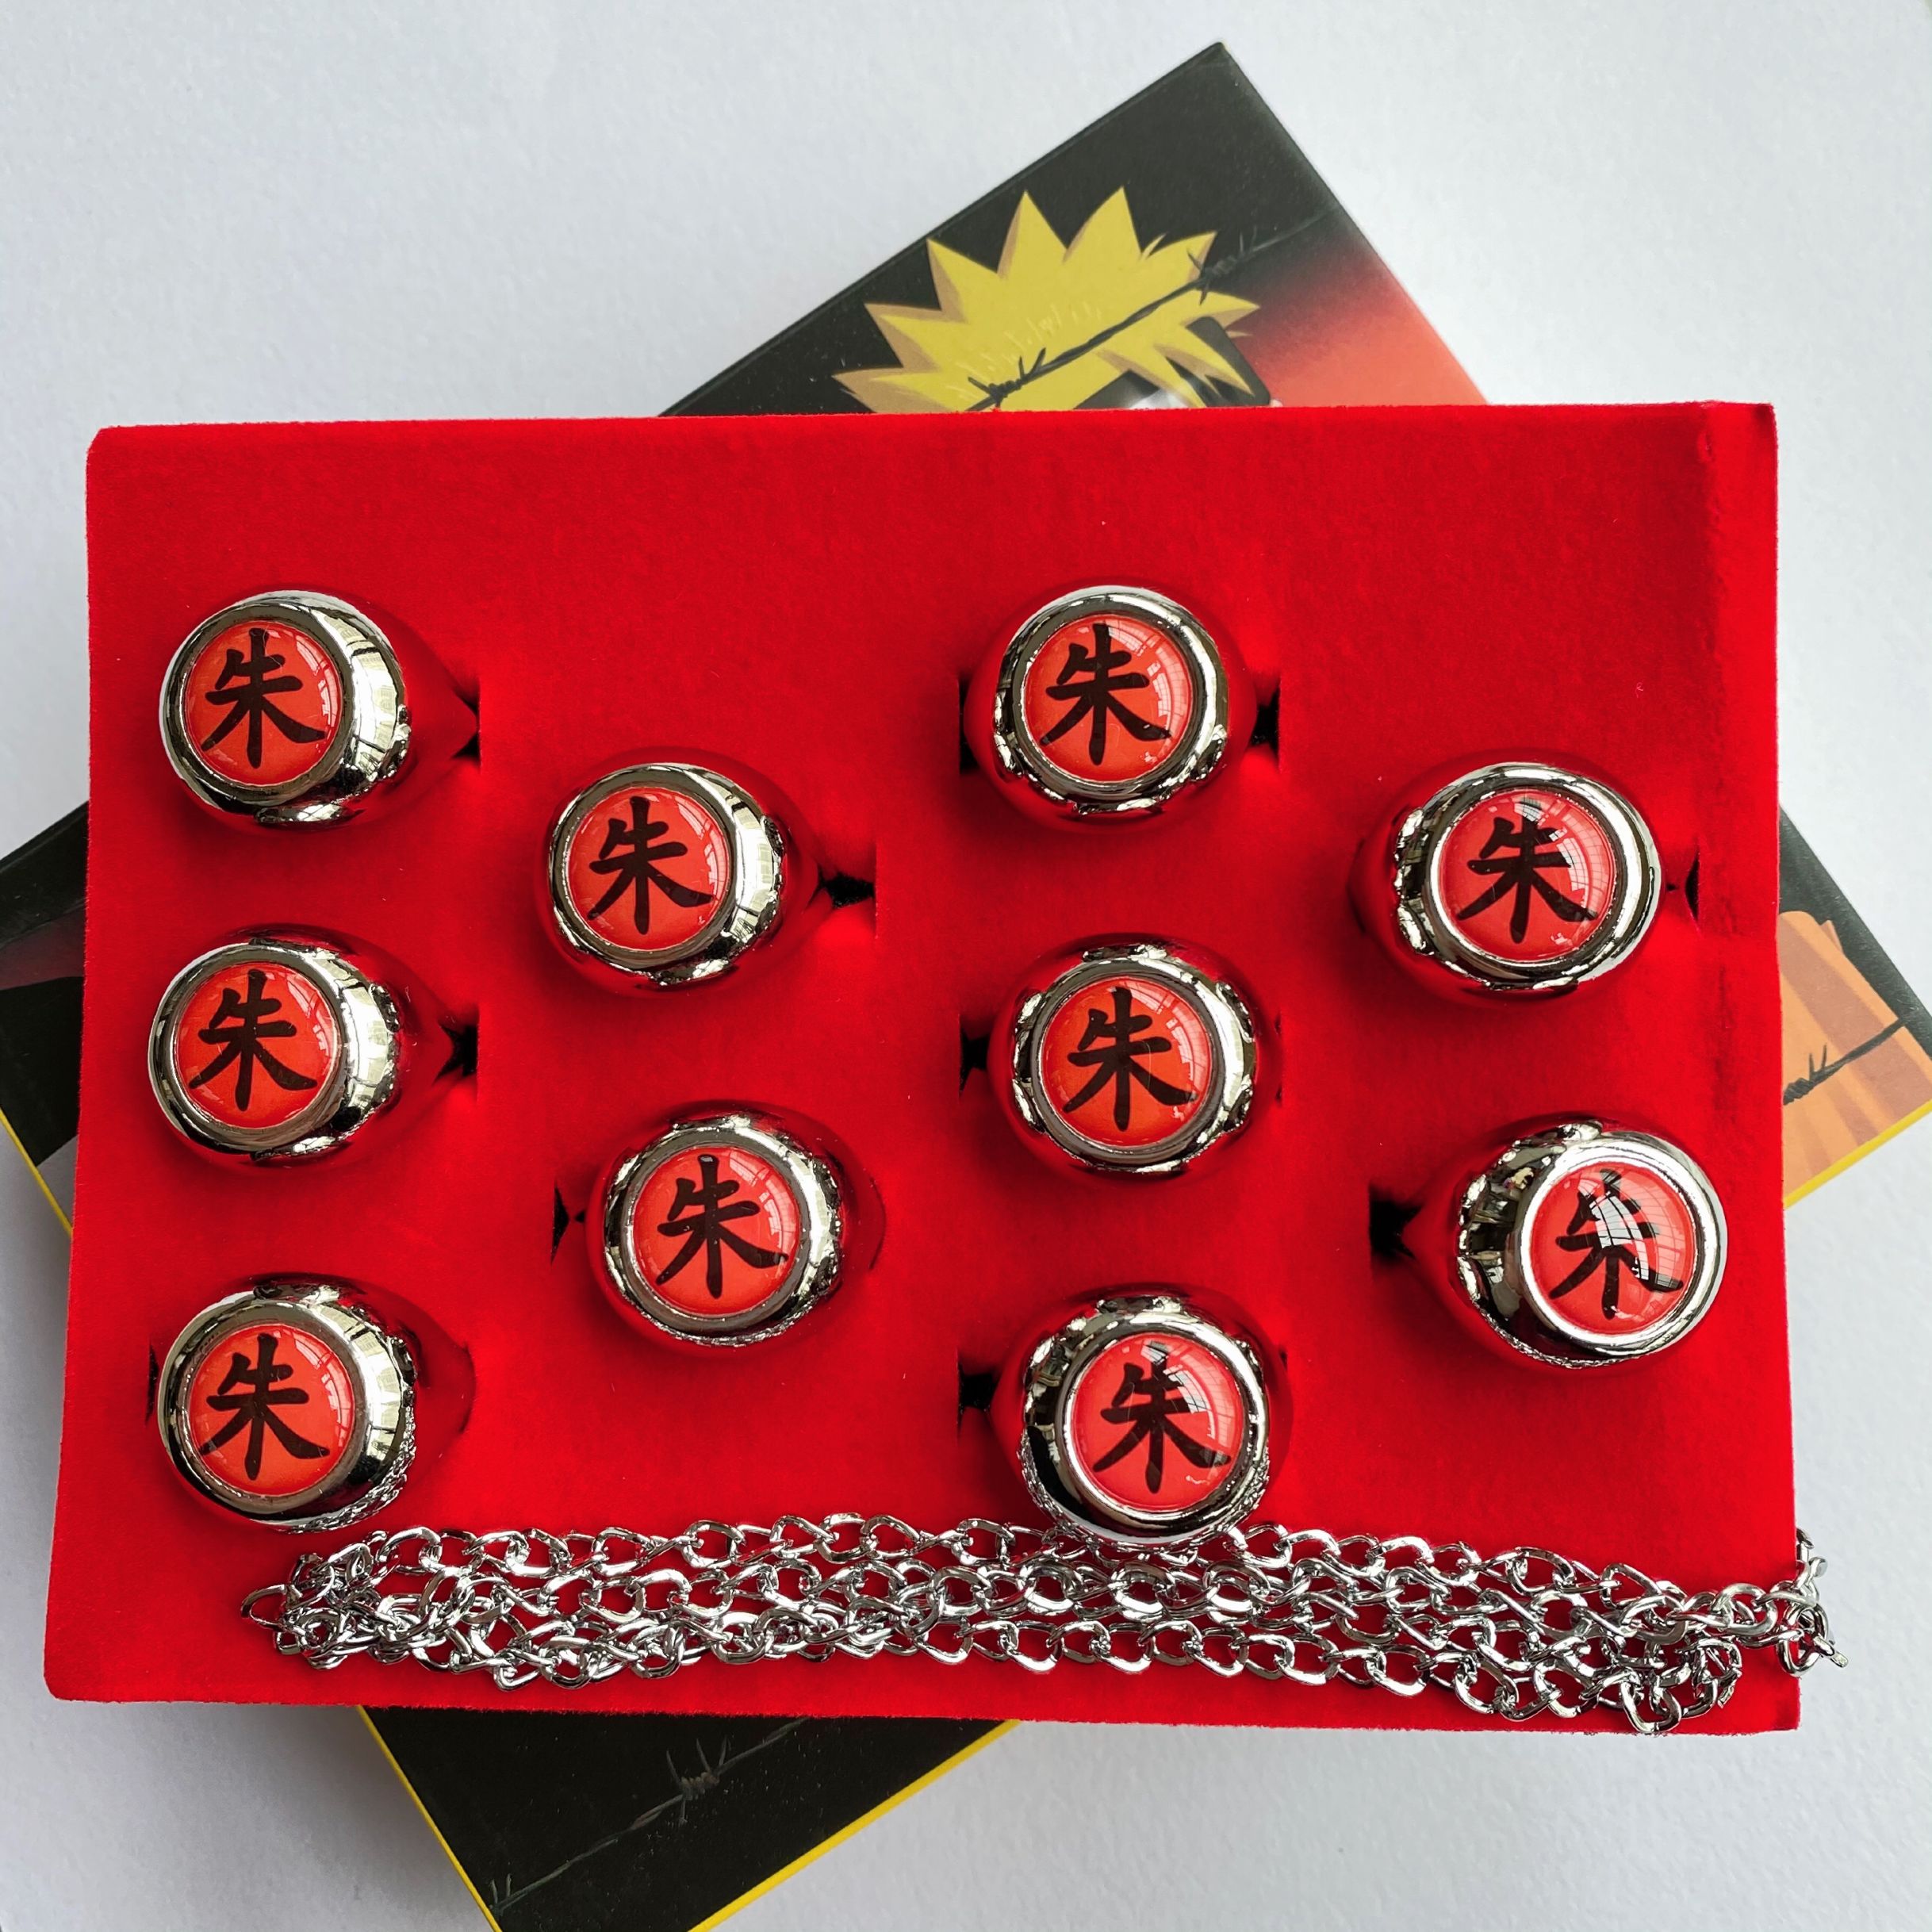 Naruto anime rings price for a set of 10 pcs